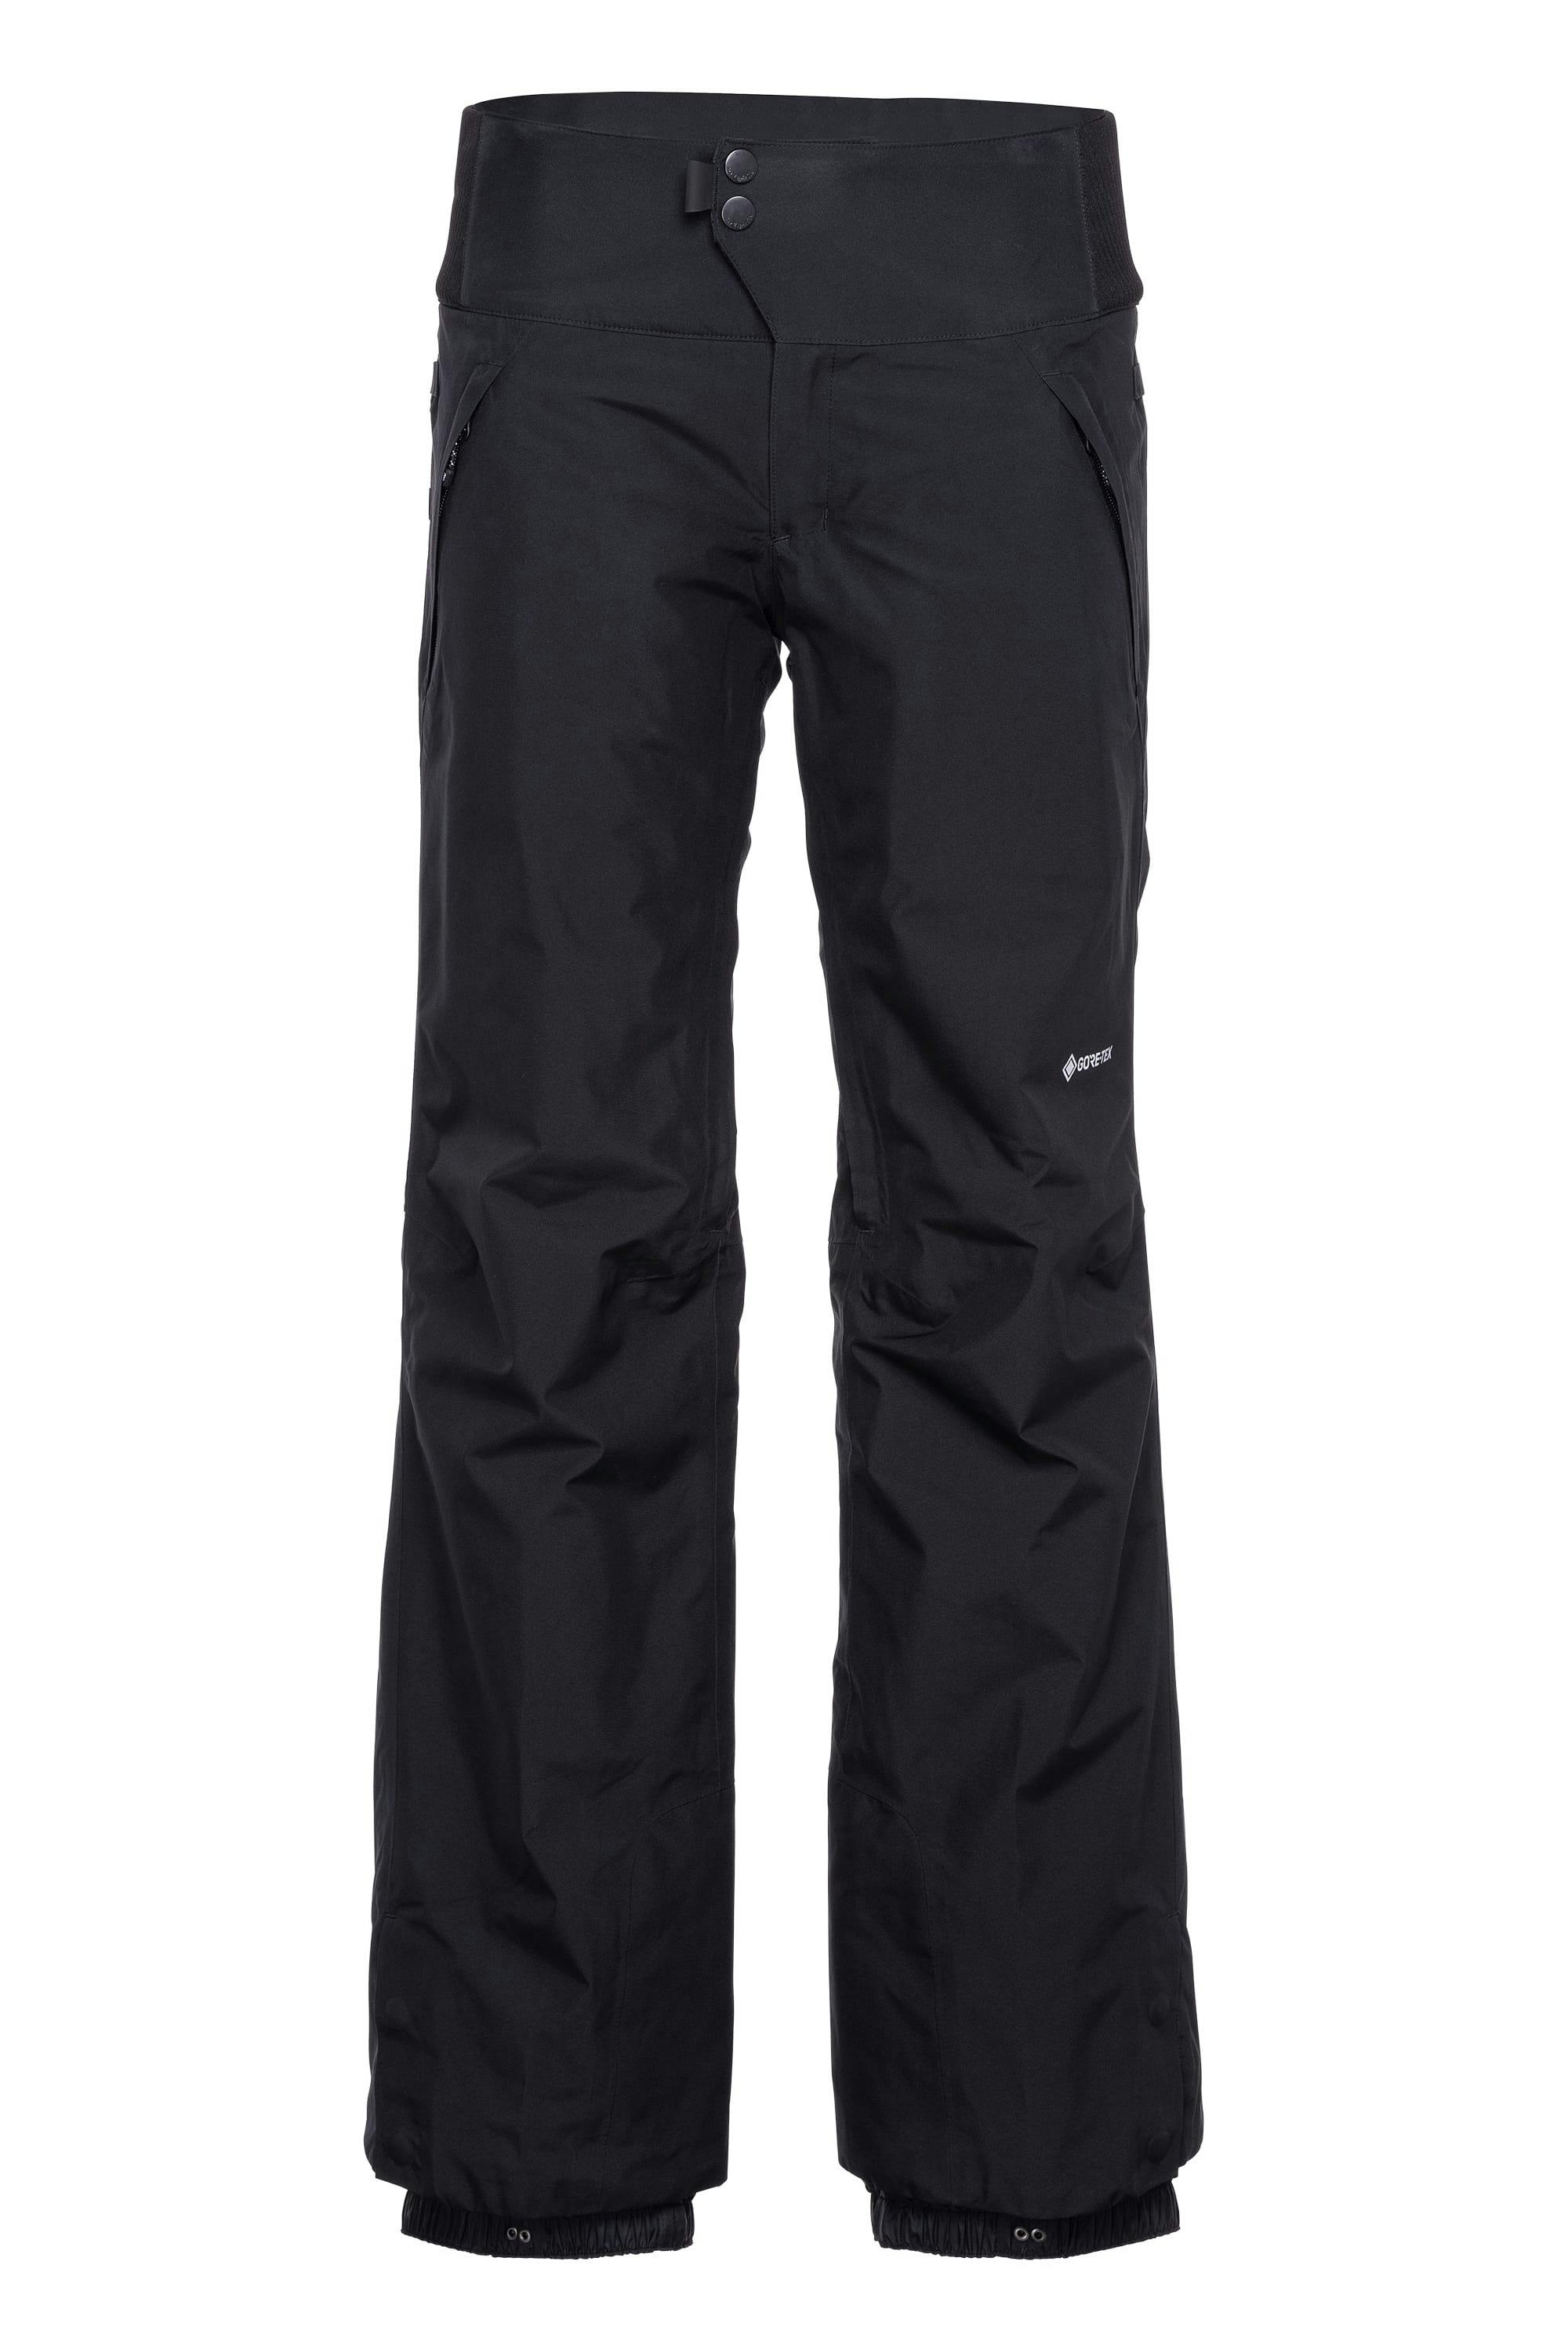 686 Women's Gore-Tex Willow 2L Insulated Pants